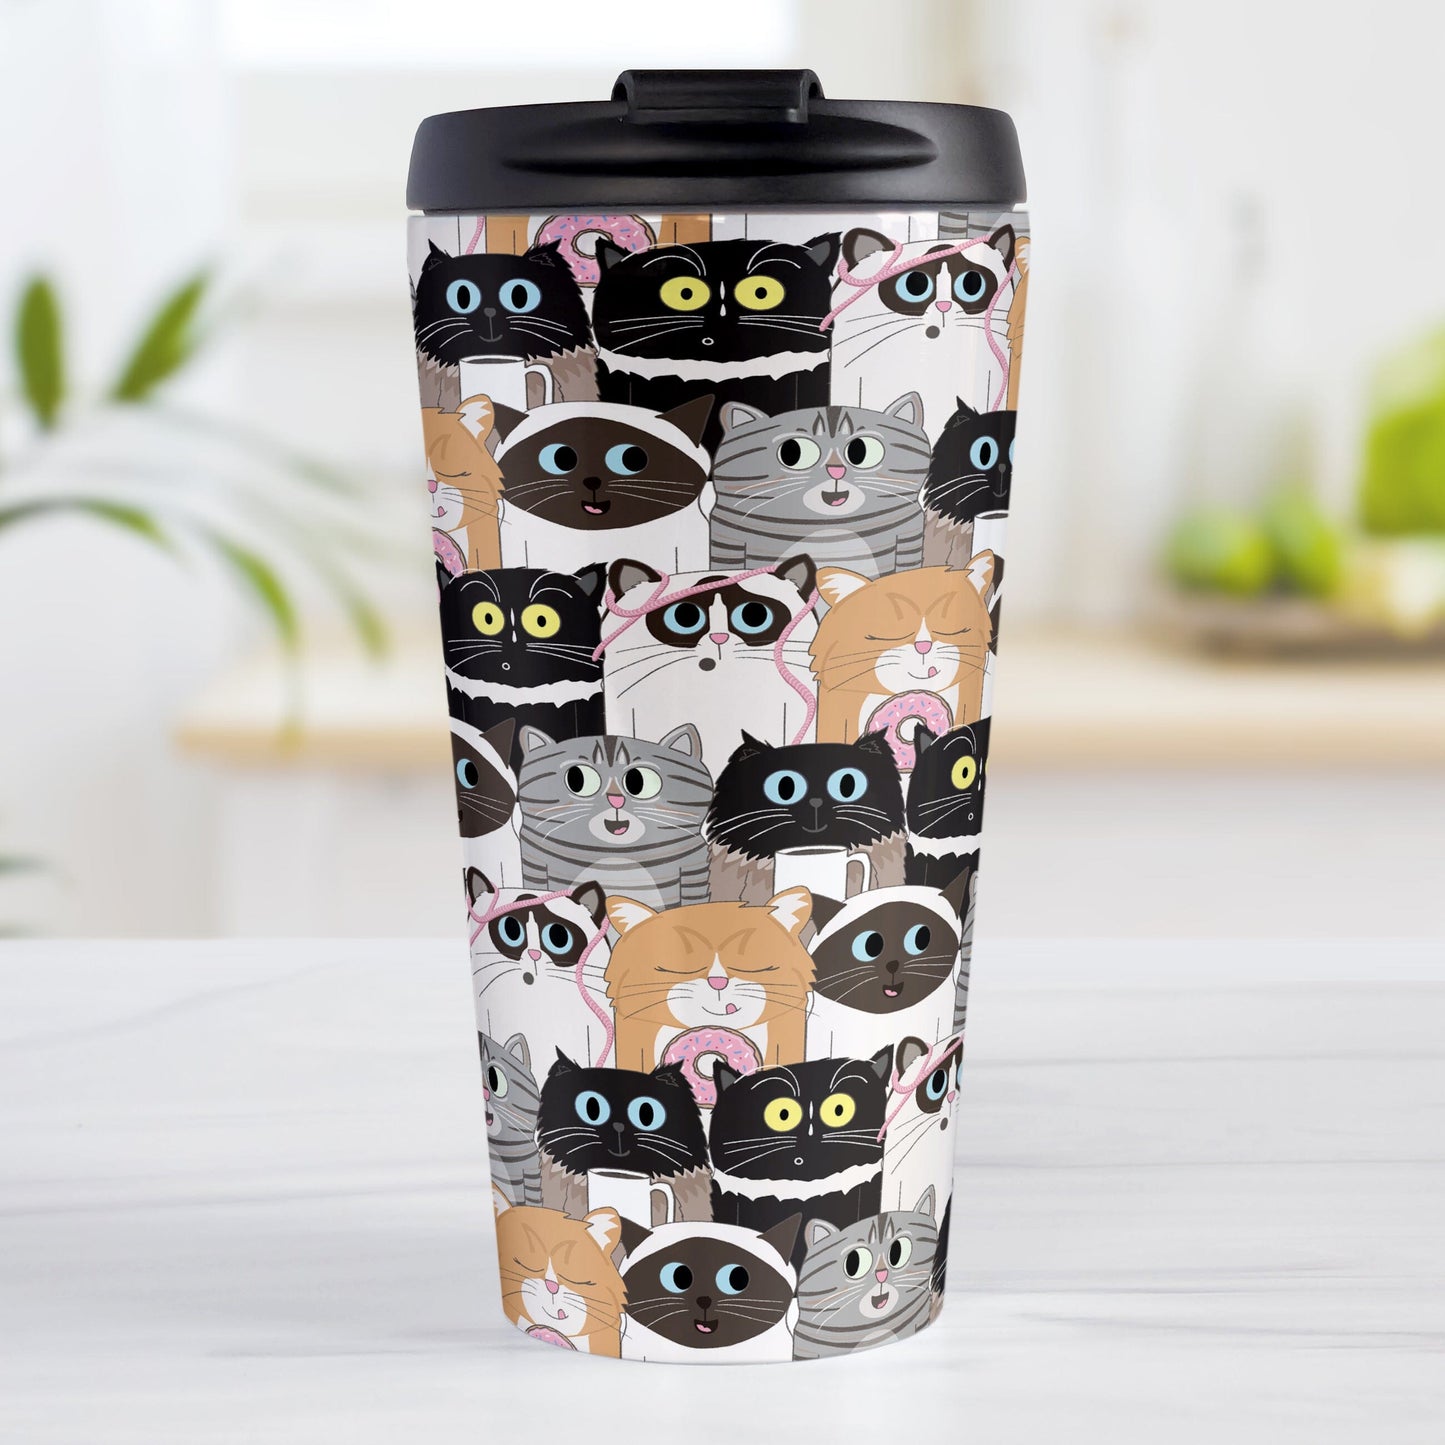 Cute Cat Stack Pattern Travel Mug (15oz) at Amy's Coffee Mugs. A cute stainless steel travel mug with an illustrated pattern of different breeds of cats with different fun expressions, with yarn, coffee, and donuts. This stacked pattern of cats wraps around the cup.